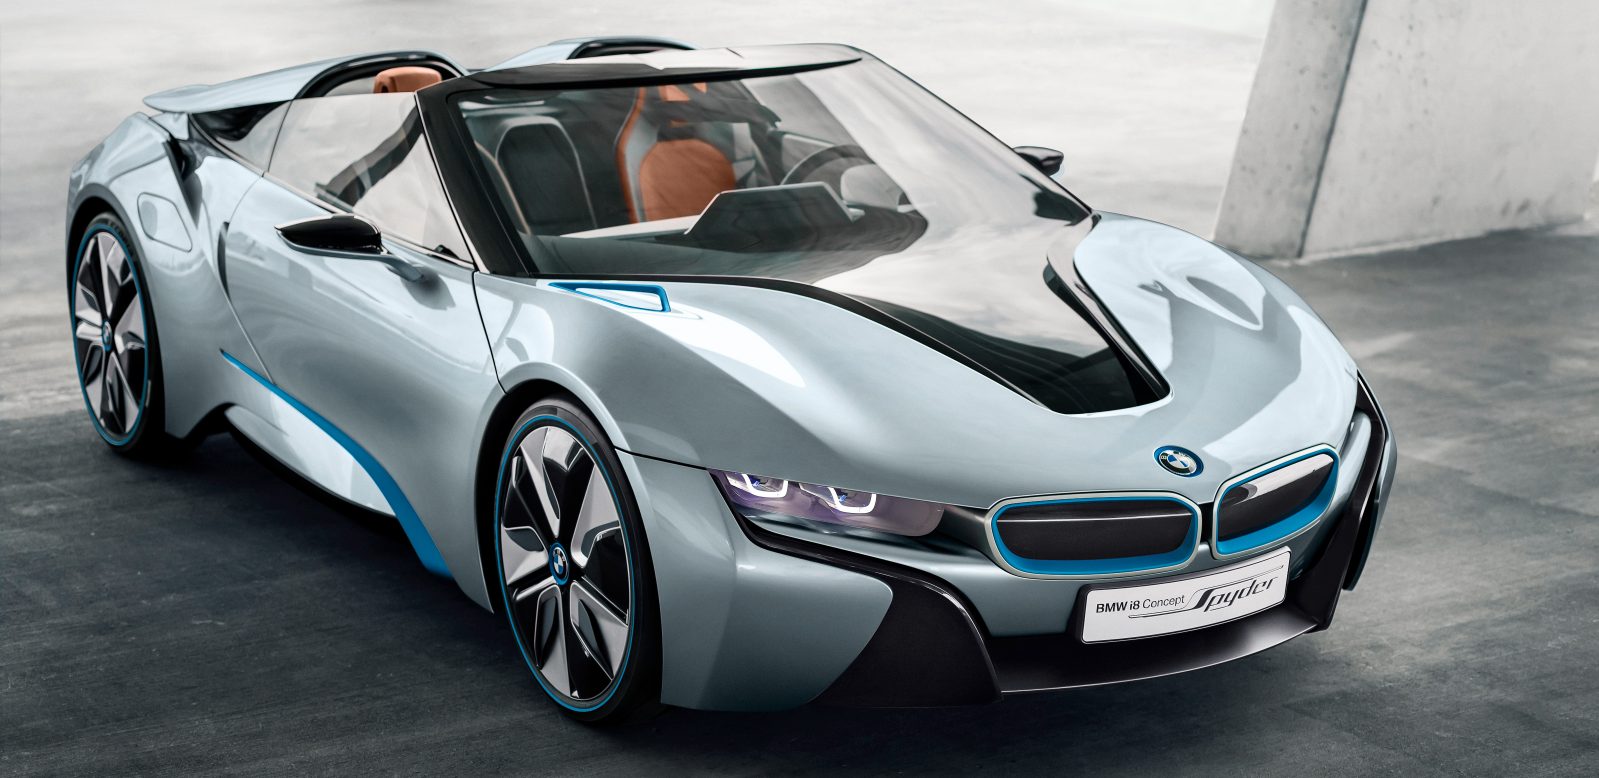 A convertible version of the BMW i8 is coming to production [Gallery